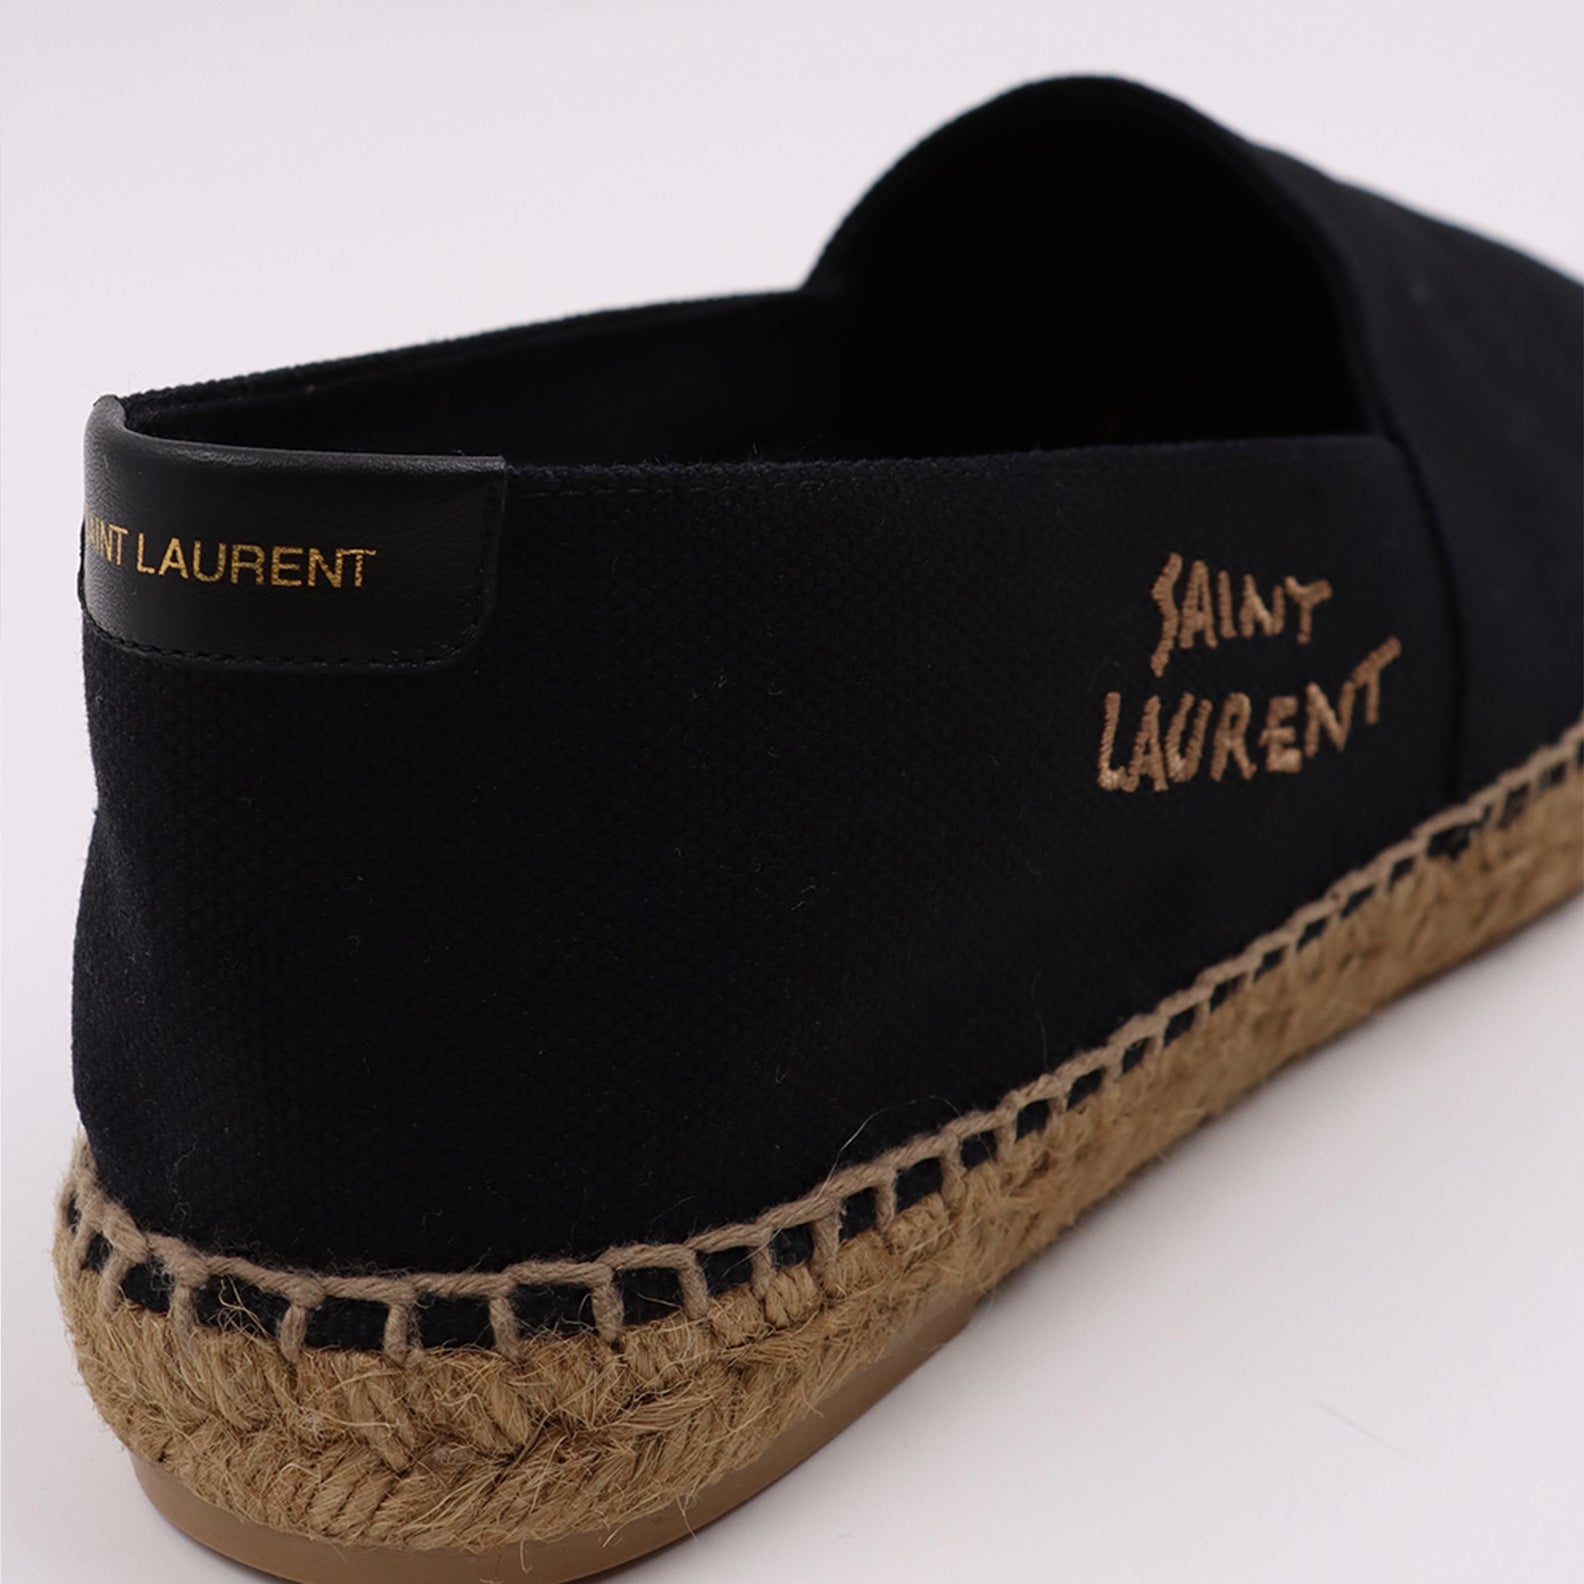 Embroidered cotton espadrilles